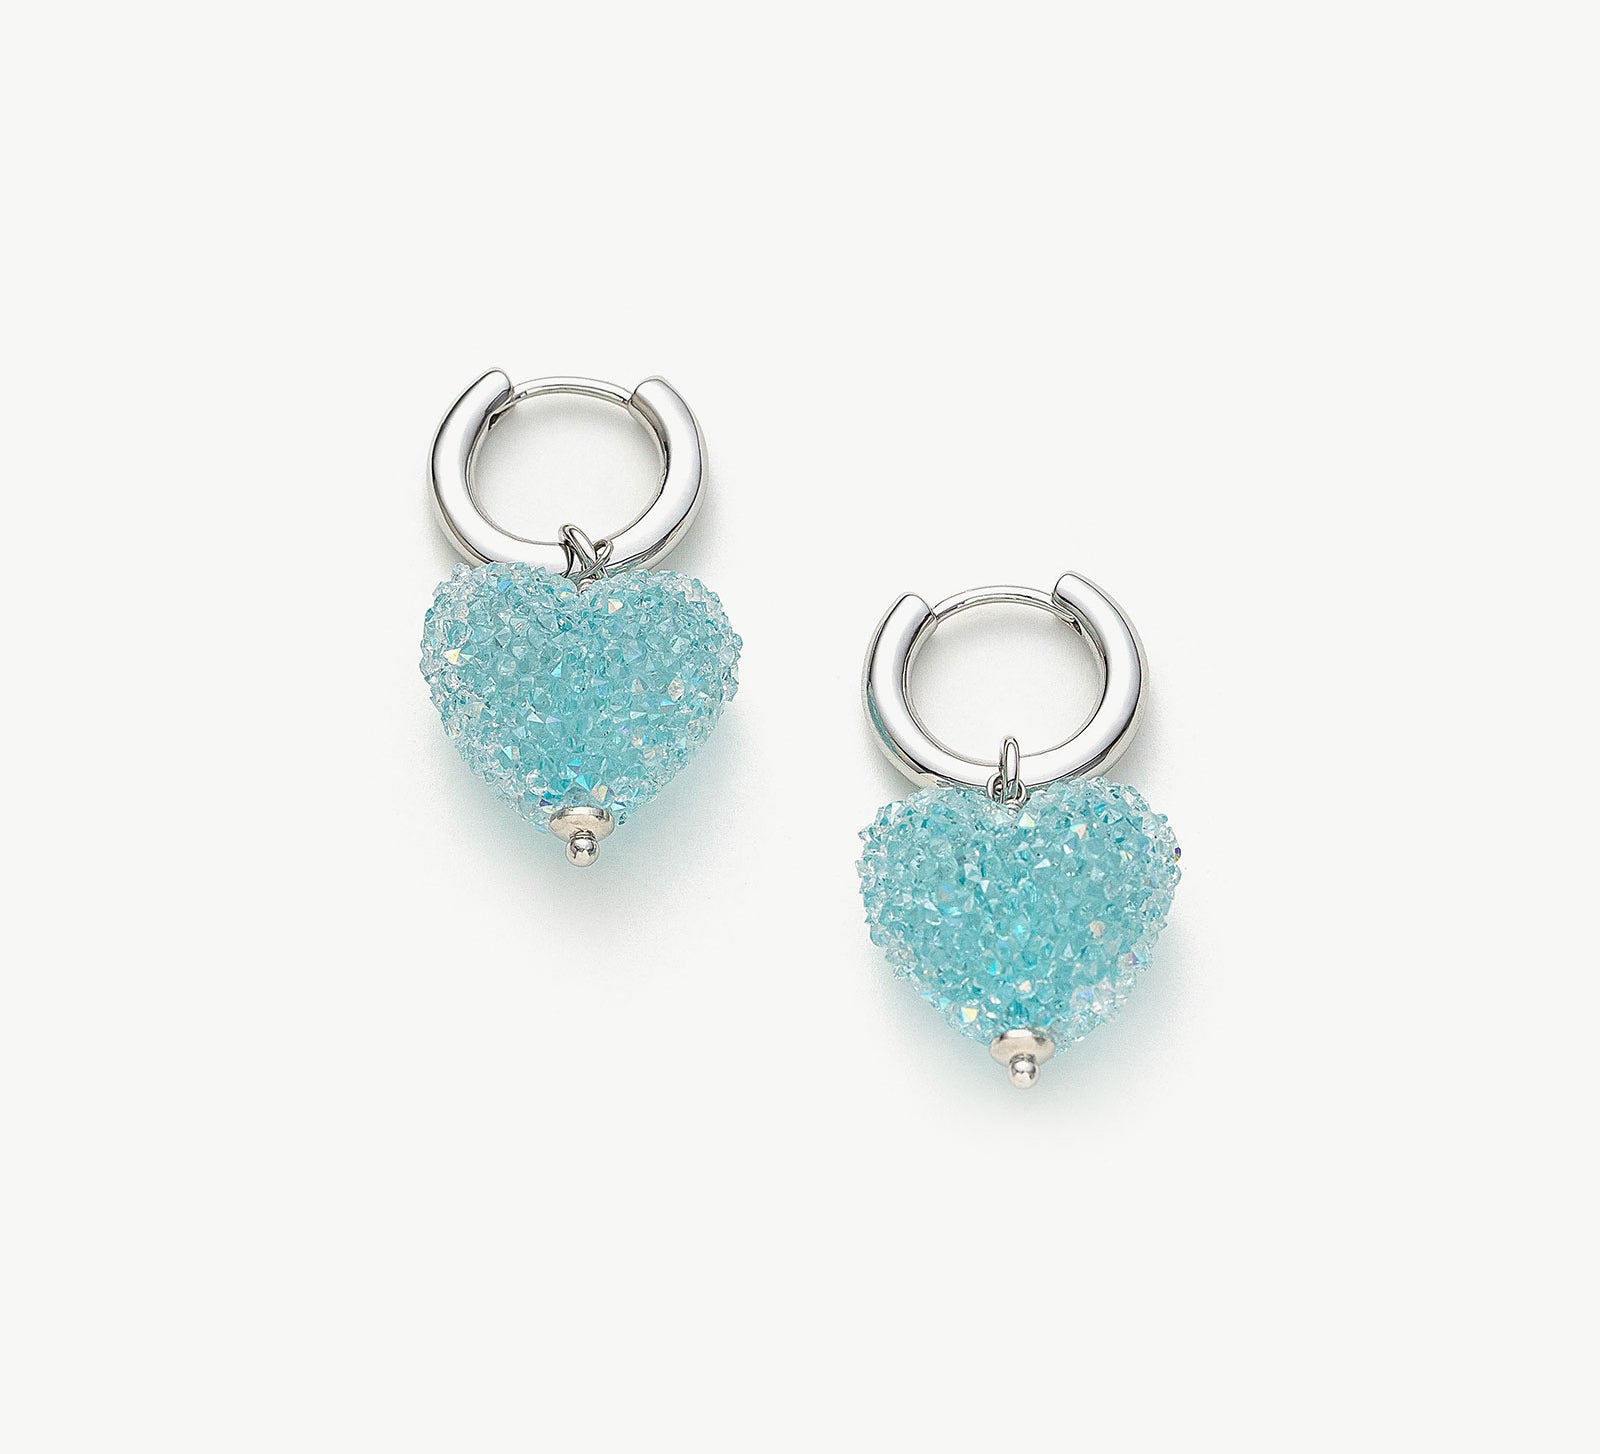 Shining Heart Hoop Earrings in Blue, a sapphire-hued accessory with heart-shaped hoops that embody elegance and sophistication for a timeless look.